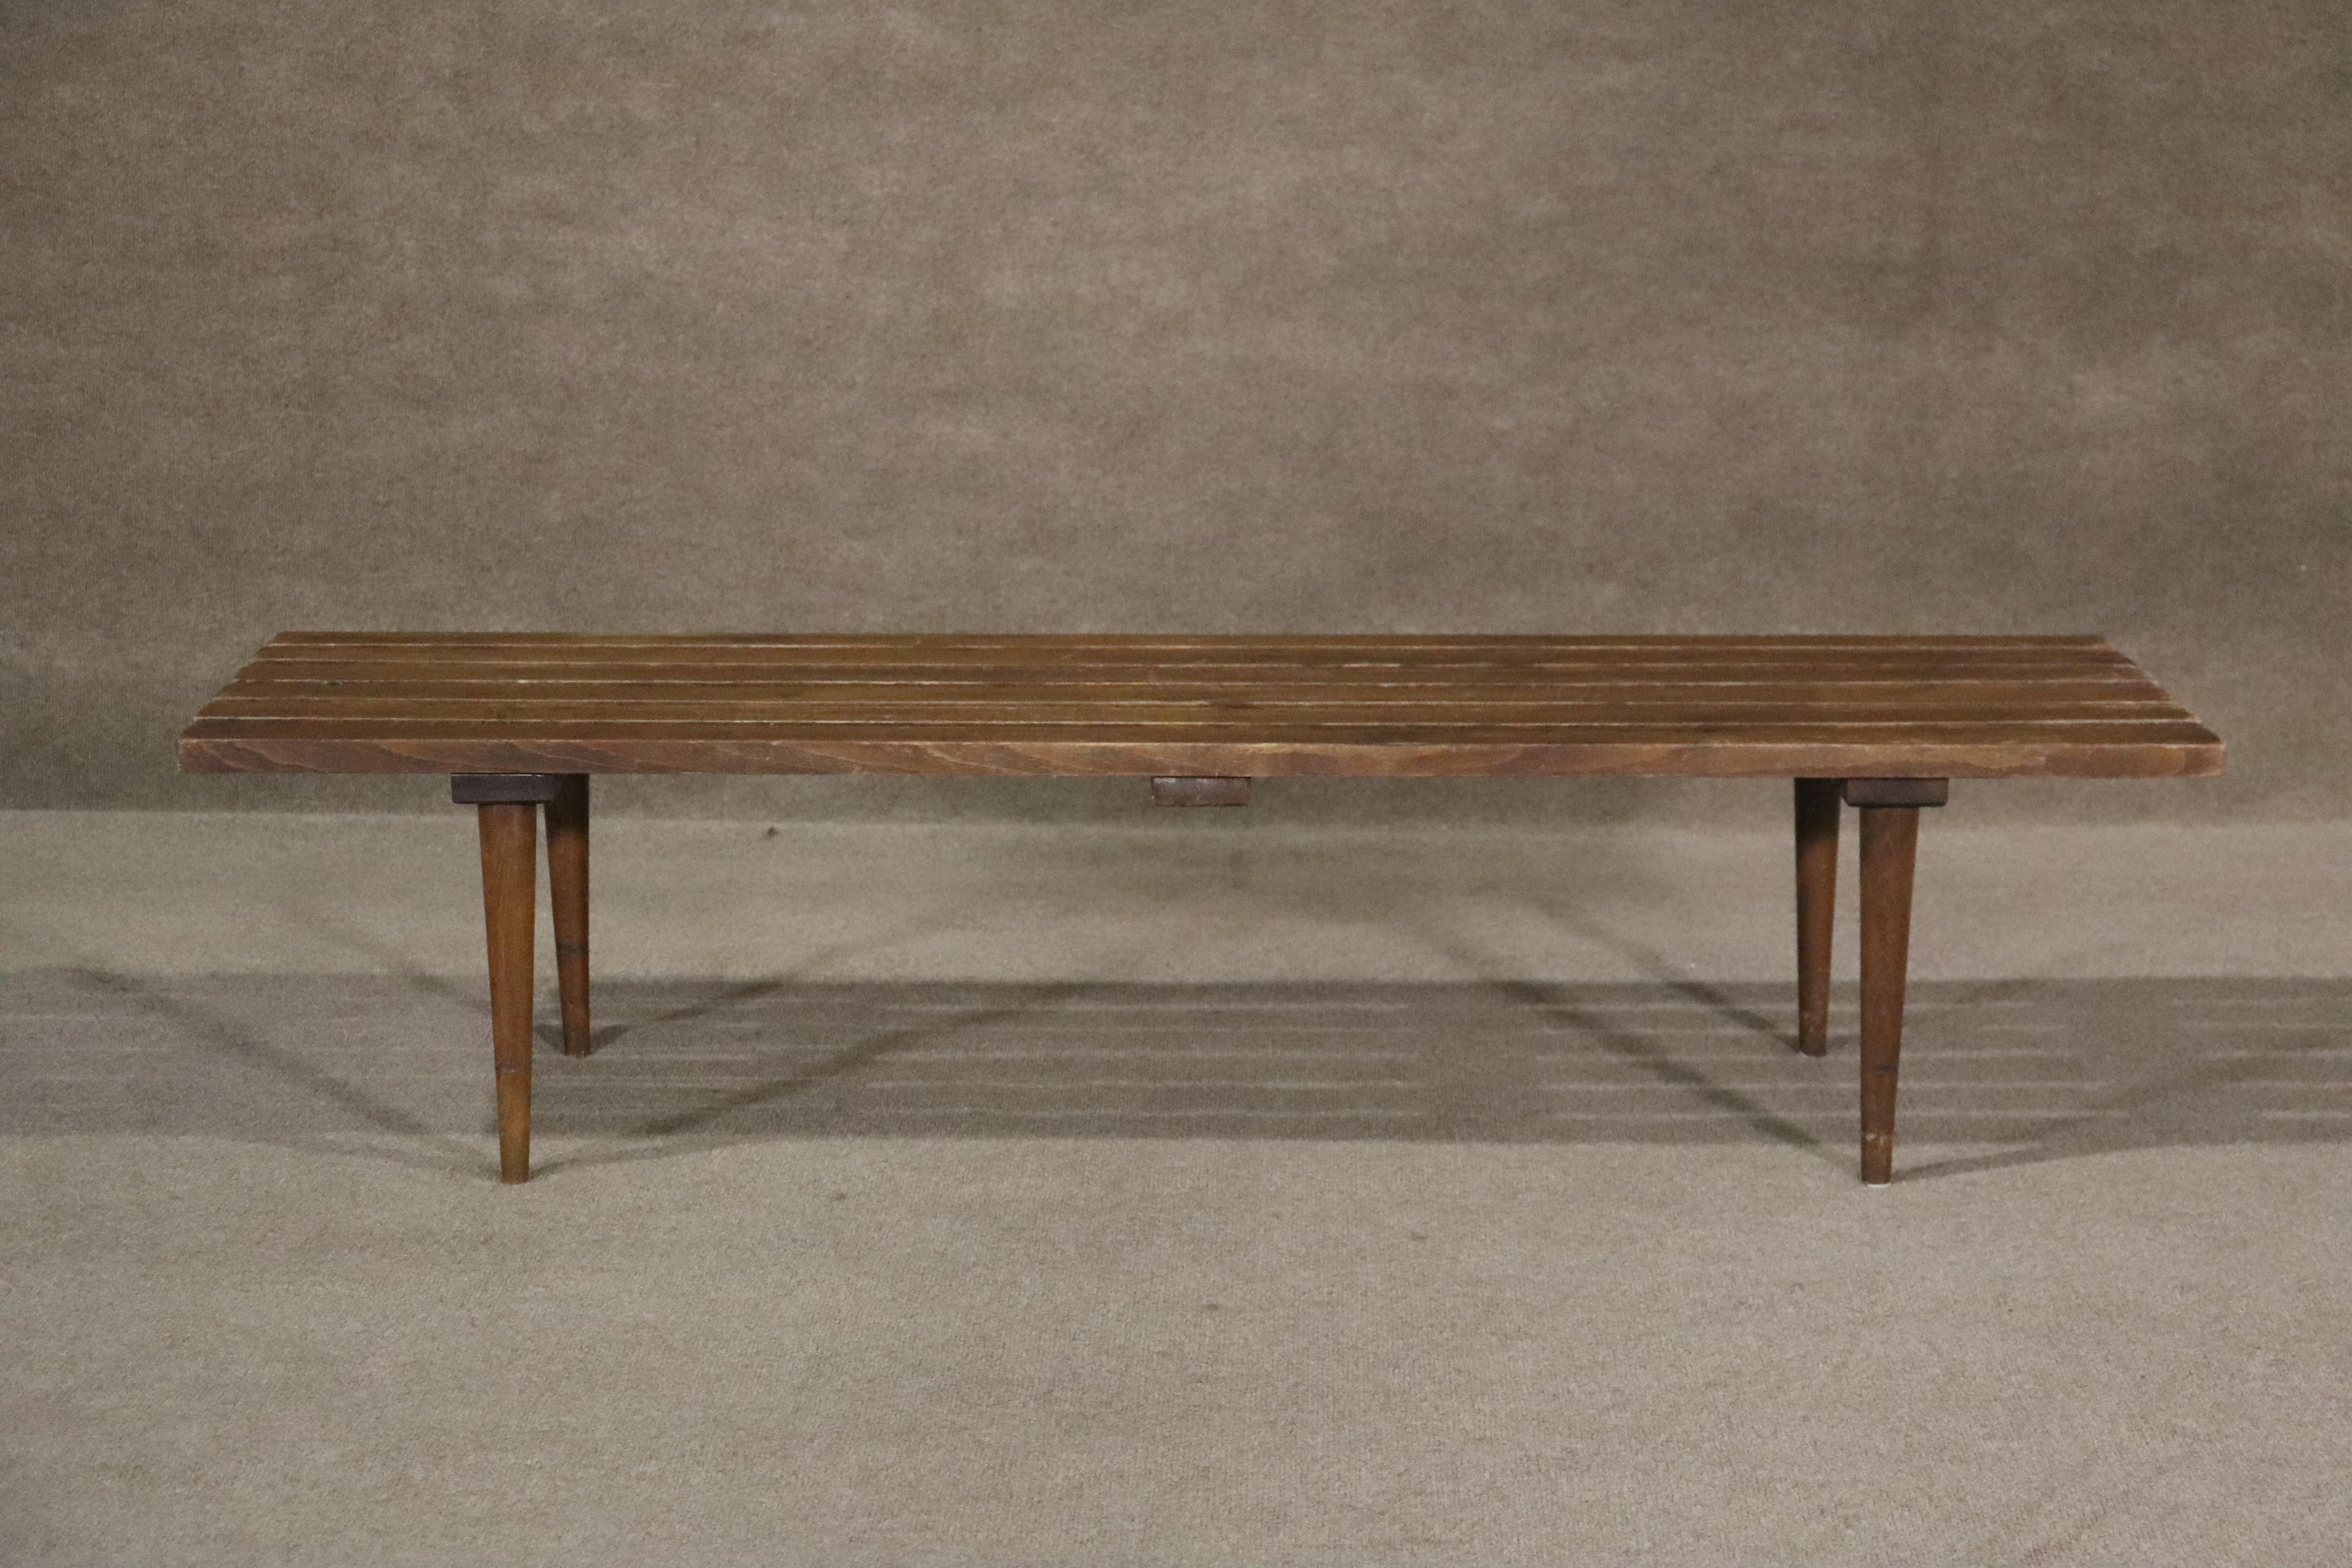 Sturdy walnut slatted bench at an ideal height for both seating and table use. Gorgeous mid-century details are great for living room use or entry way seating.

Please confirm location (NY or NJ)